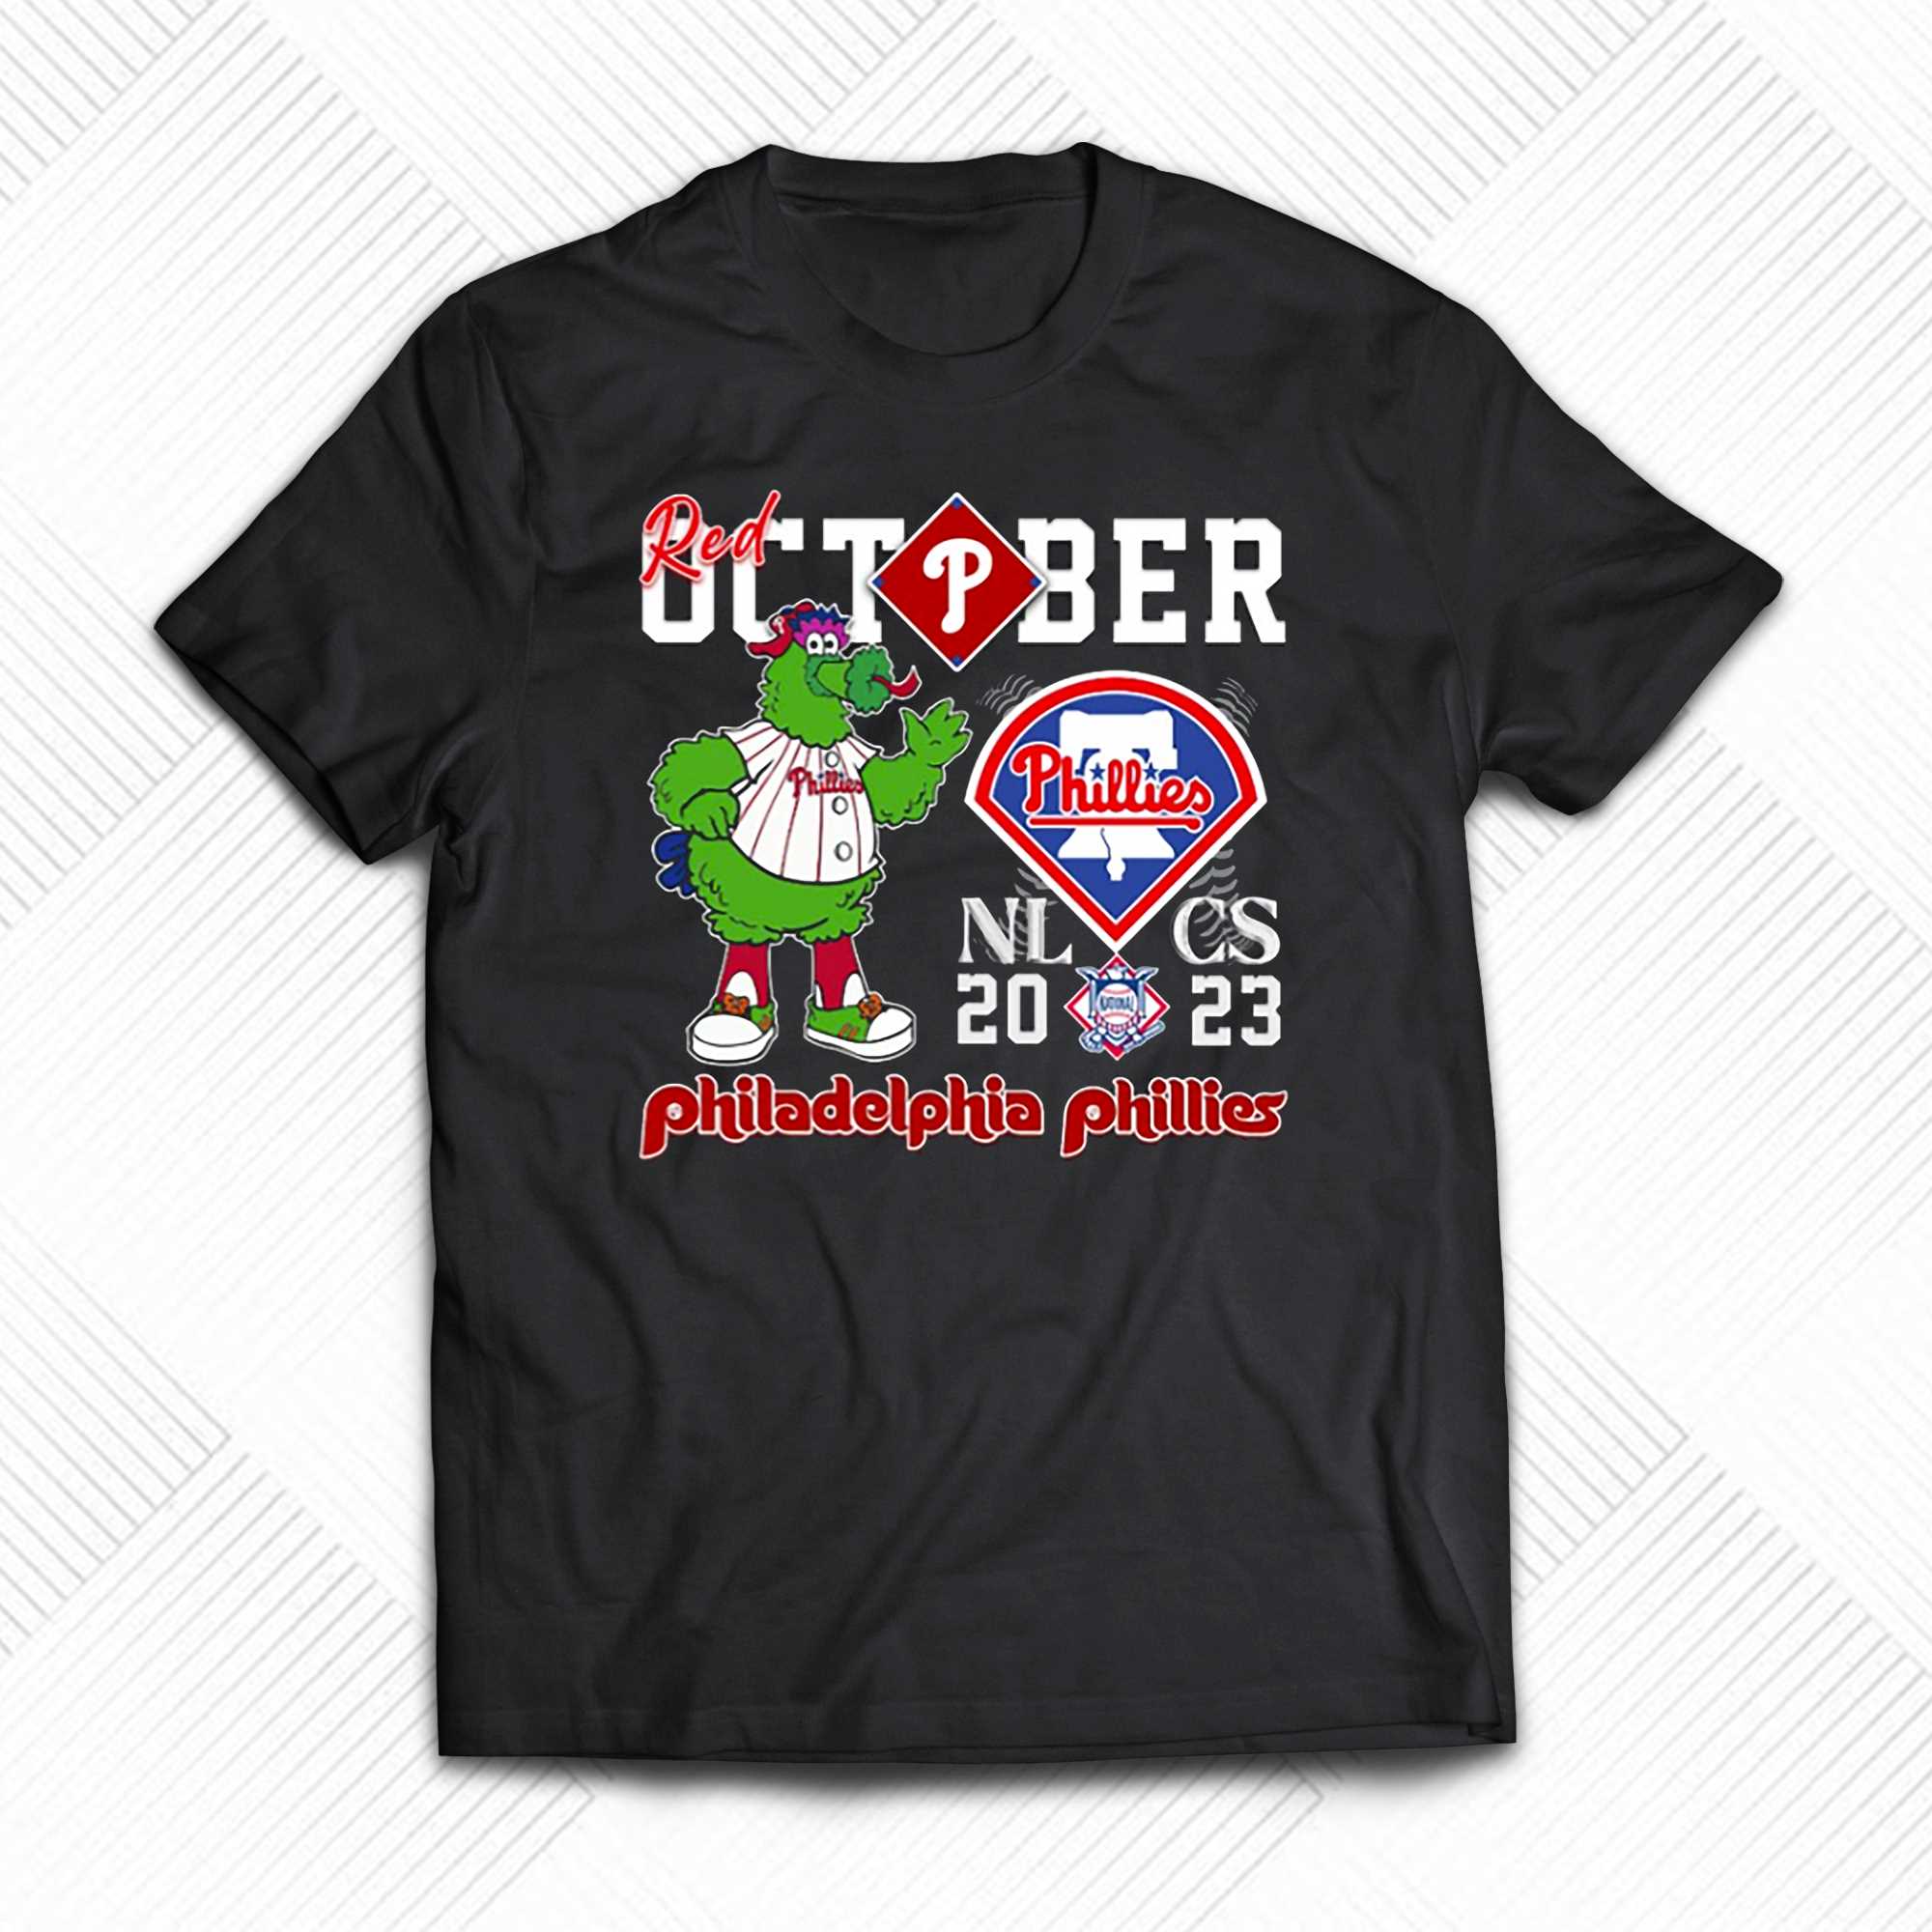 Red October 2023 NLCS Phillies Shirt, Philadelphia Phillies 2023 Gift For  Fans - Bring Your Ideas, Thoughts And Imaginations Into Reality Today